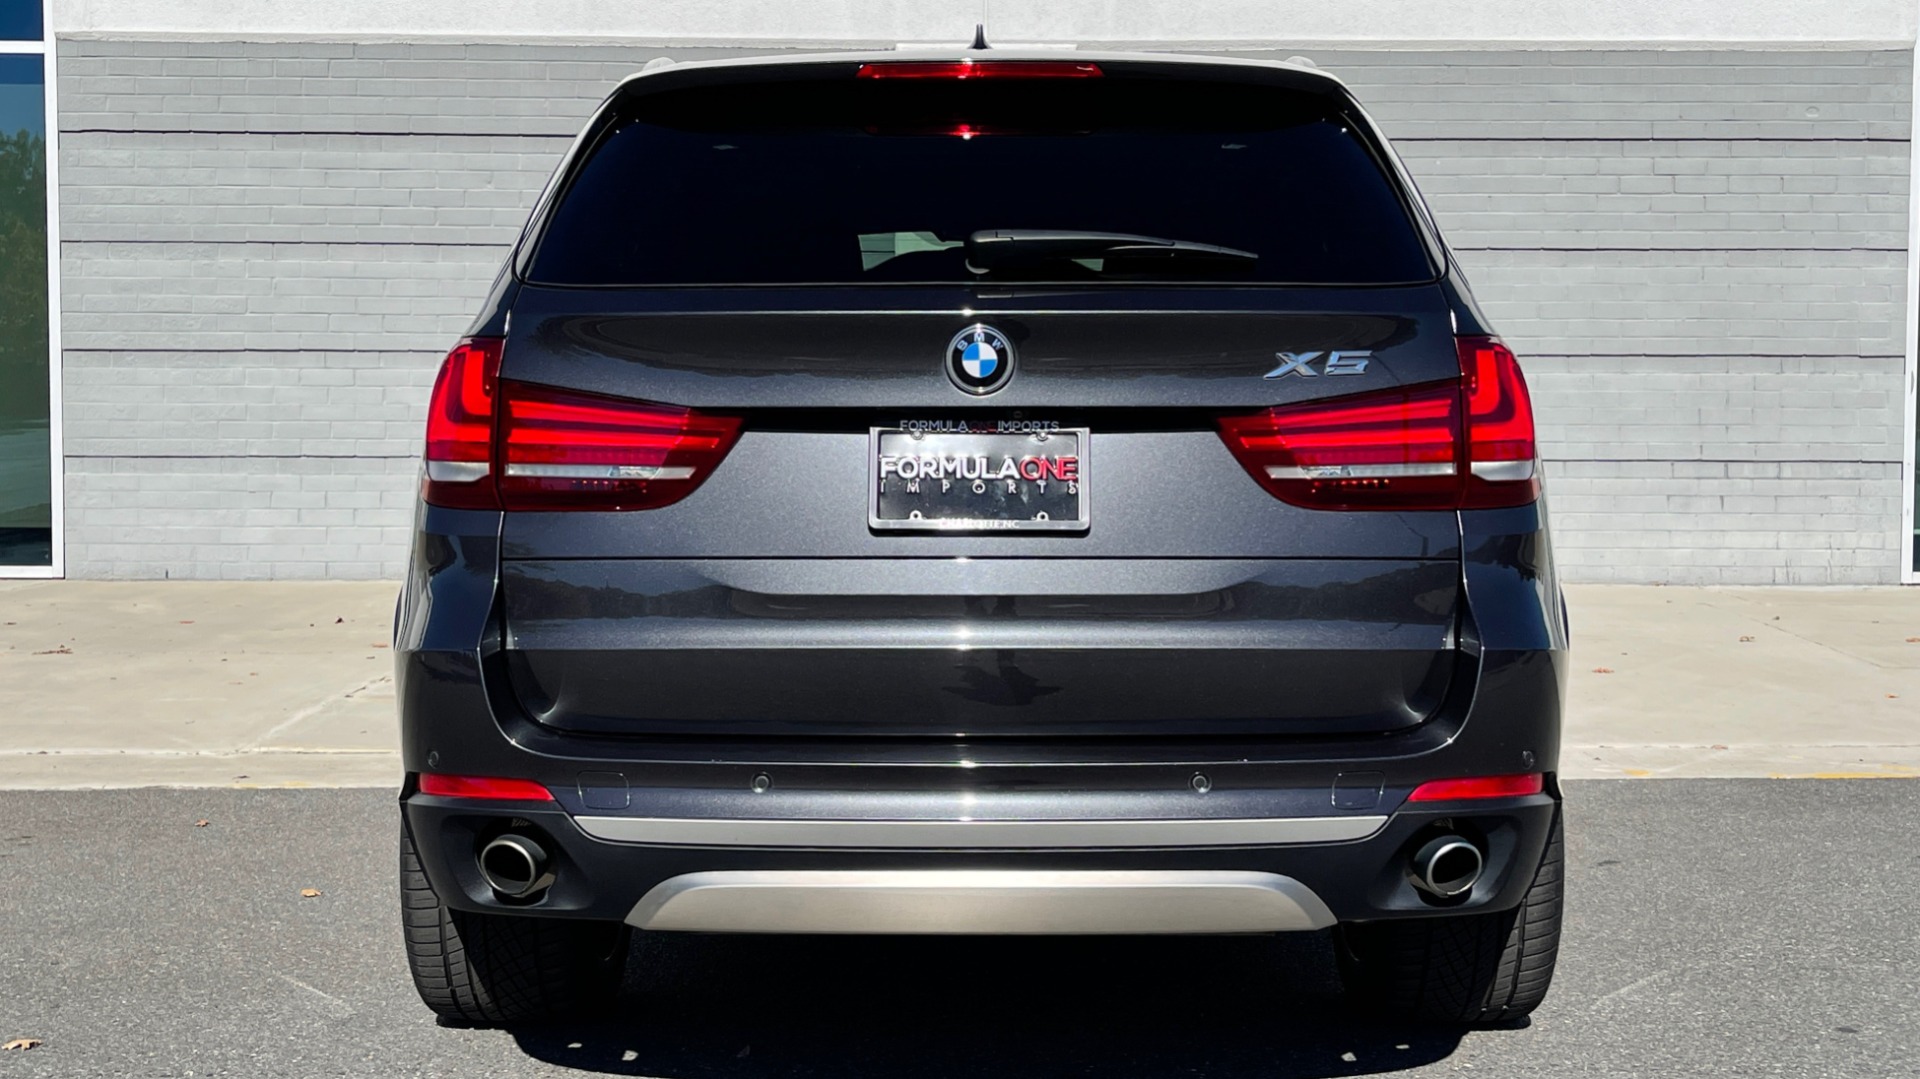 Used 2017 BMW X5 XDRIVE35I PREMIUM / NAV / SUNROOF / DRVR ASST / H/K SND / CAMERA for sale Sold at Formula Imports in Charlotte NC 28227 19